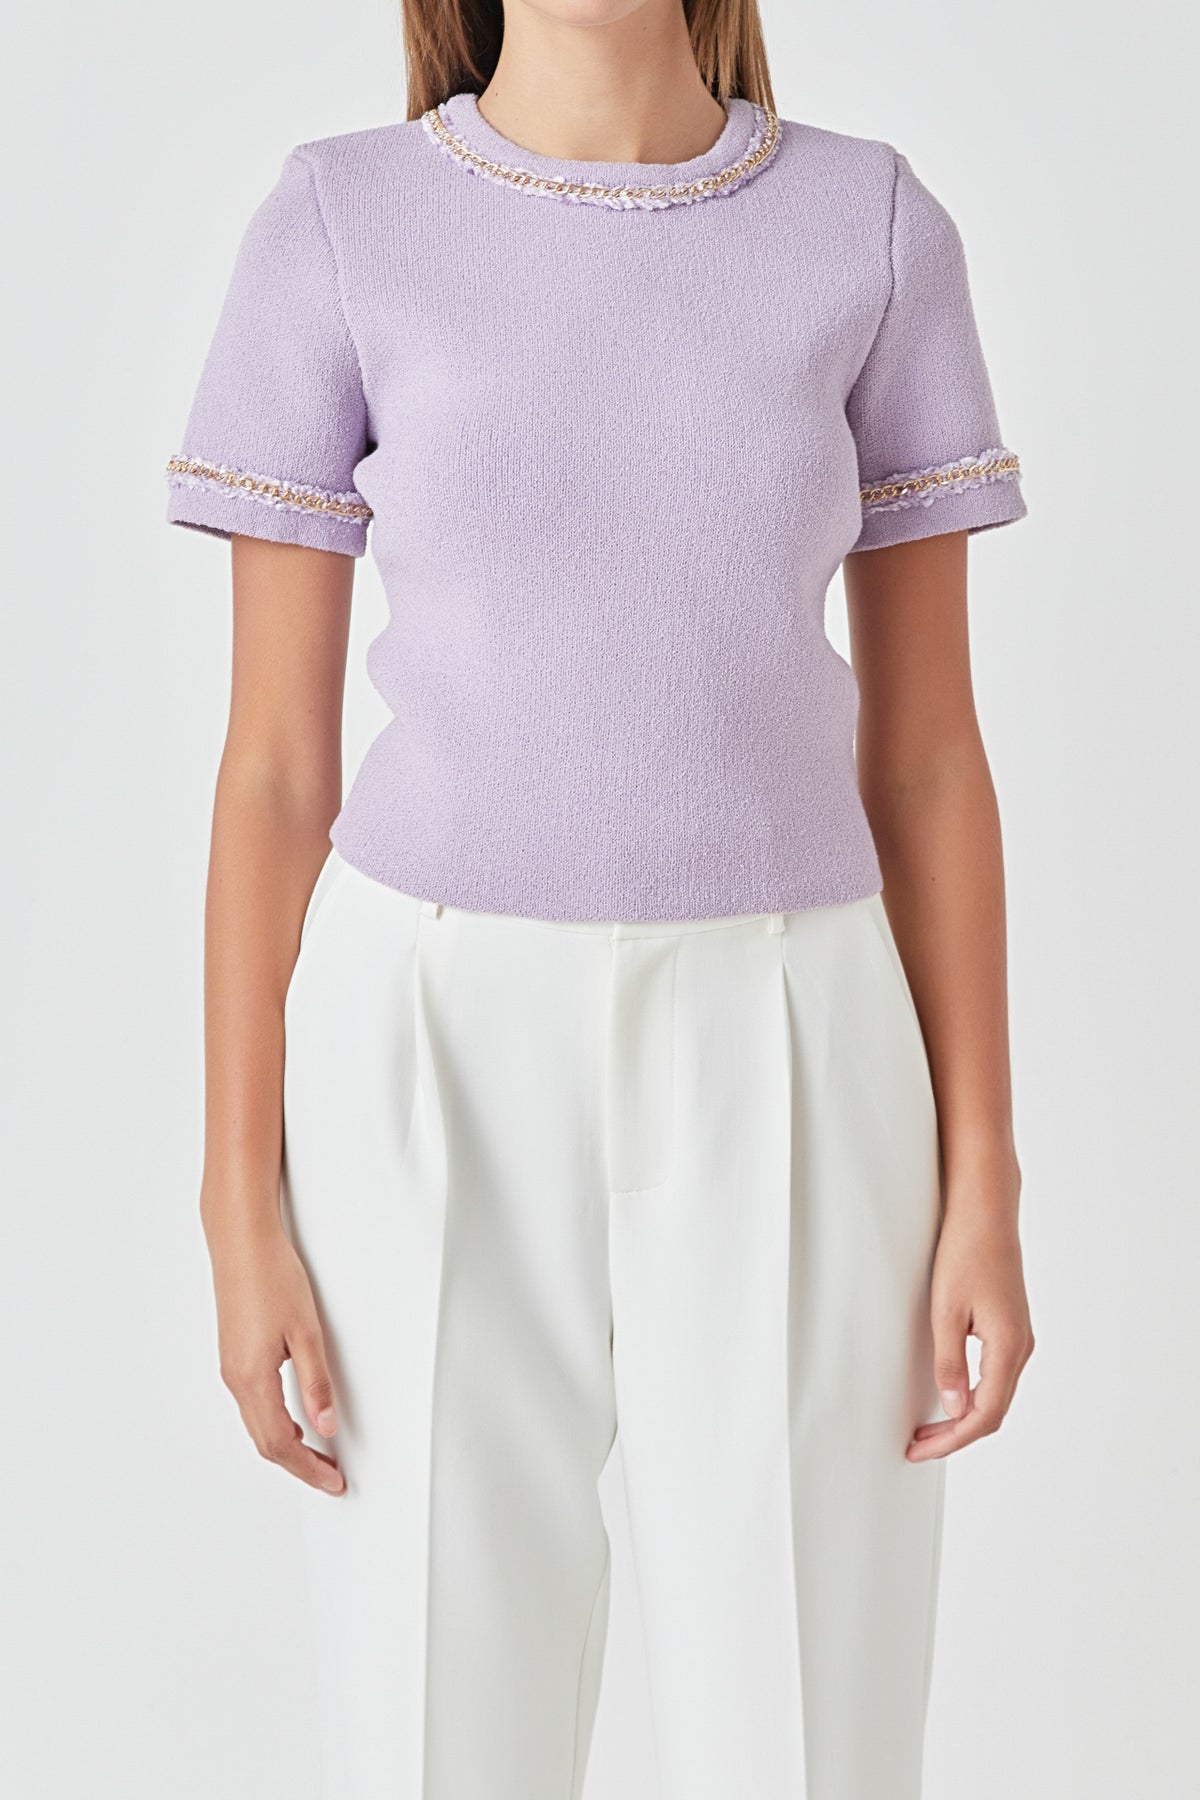 ENDLESS ROSE - Chain Trim Knit Short Sleeve Top - TOPS available at Objectrare